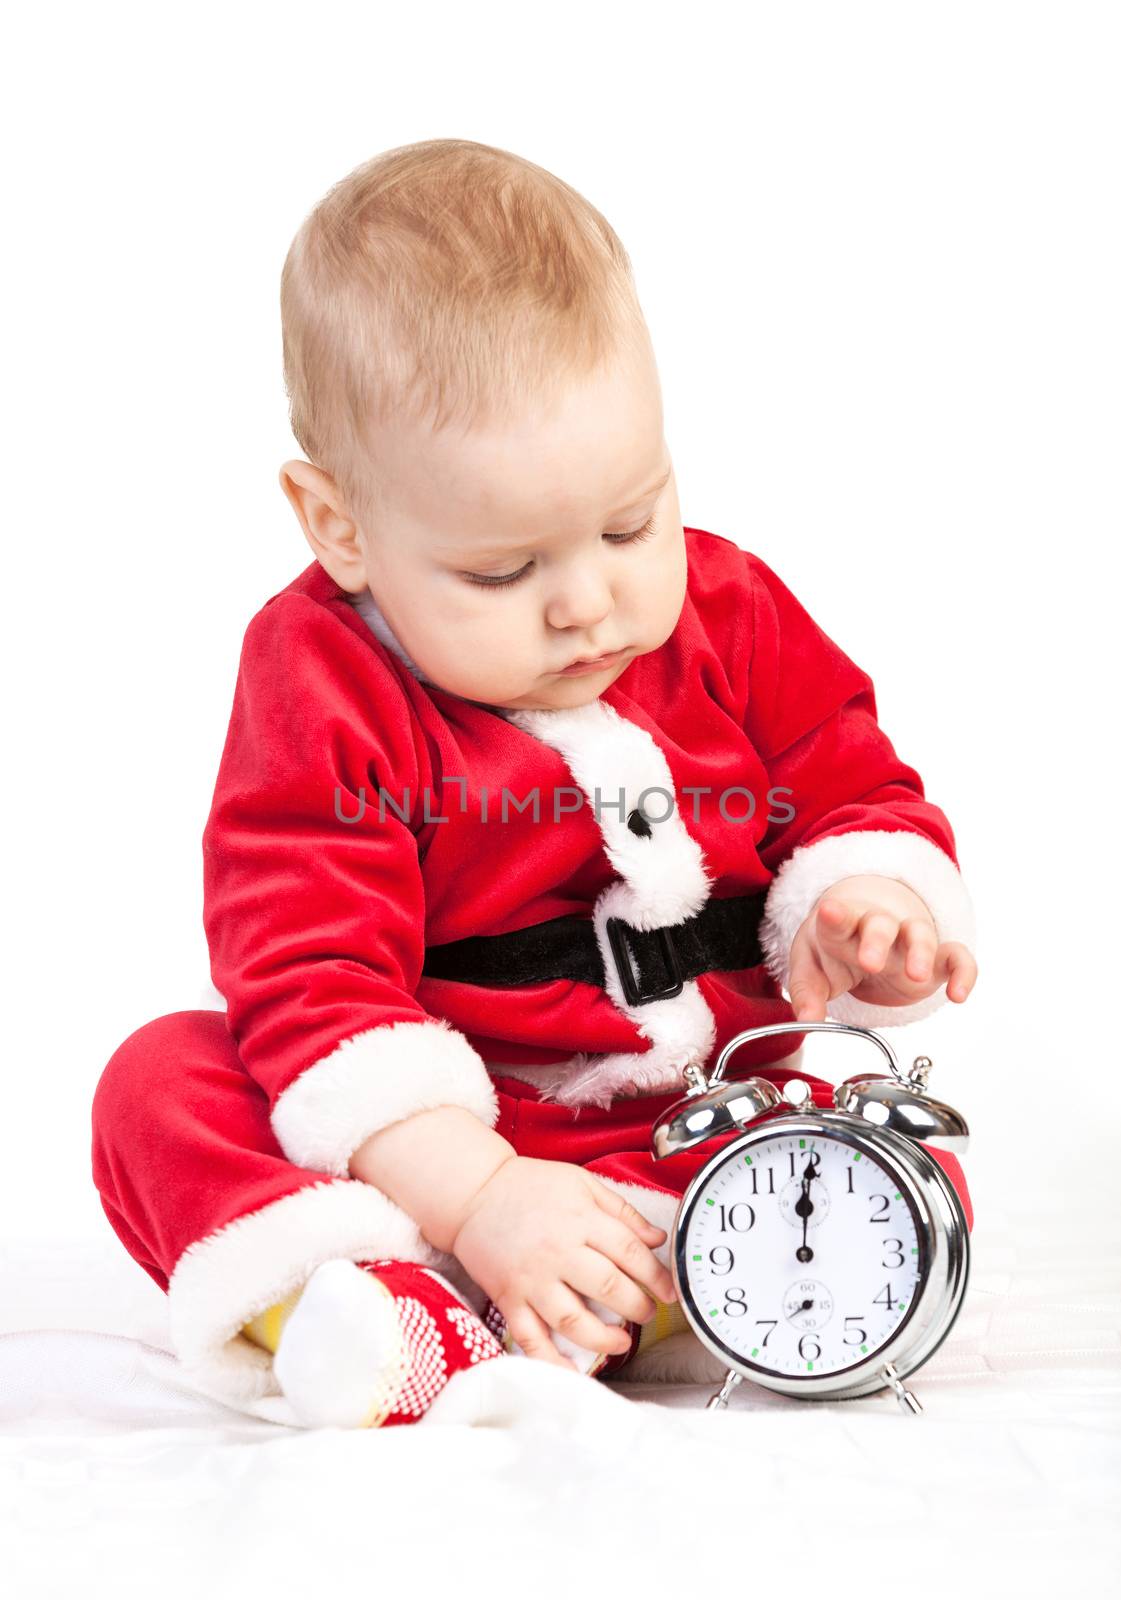 Little boy in Santa costume with alarm clock by photobac